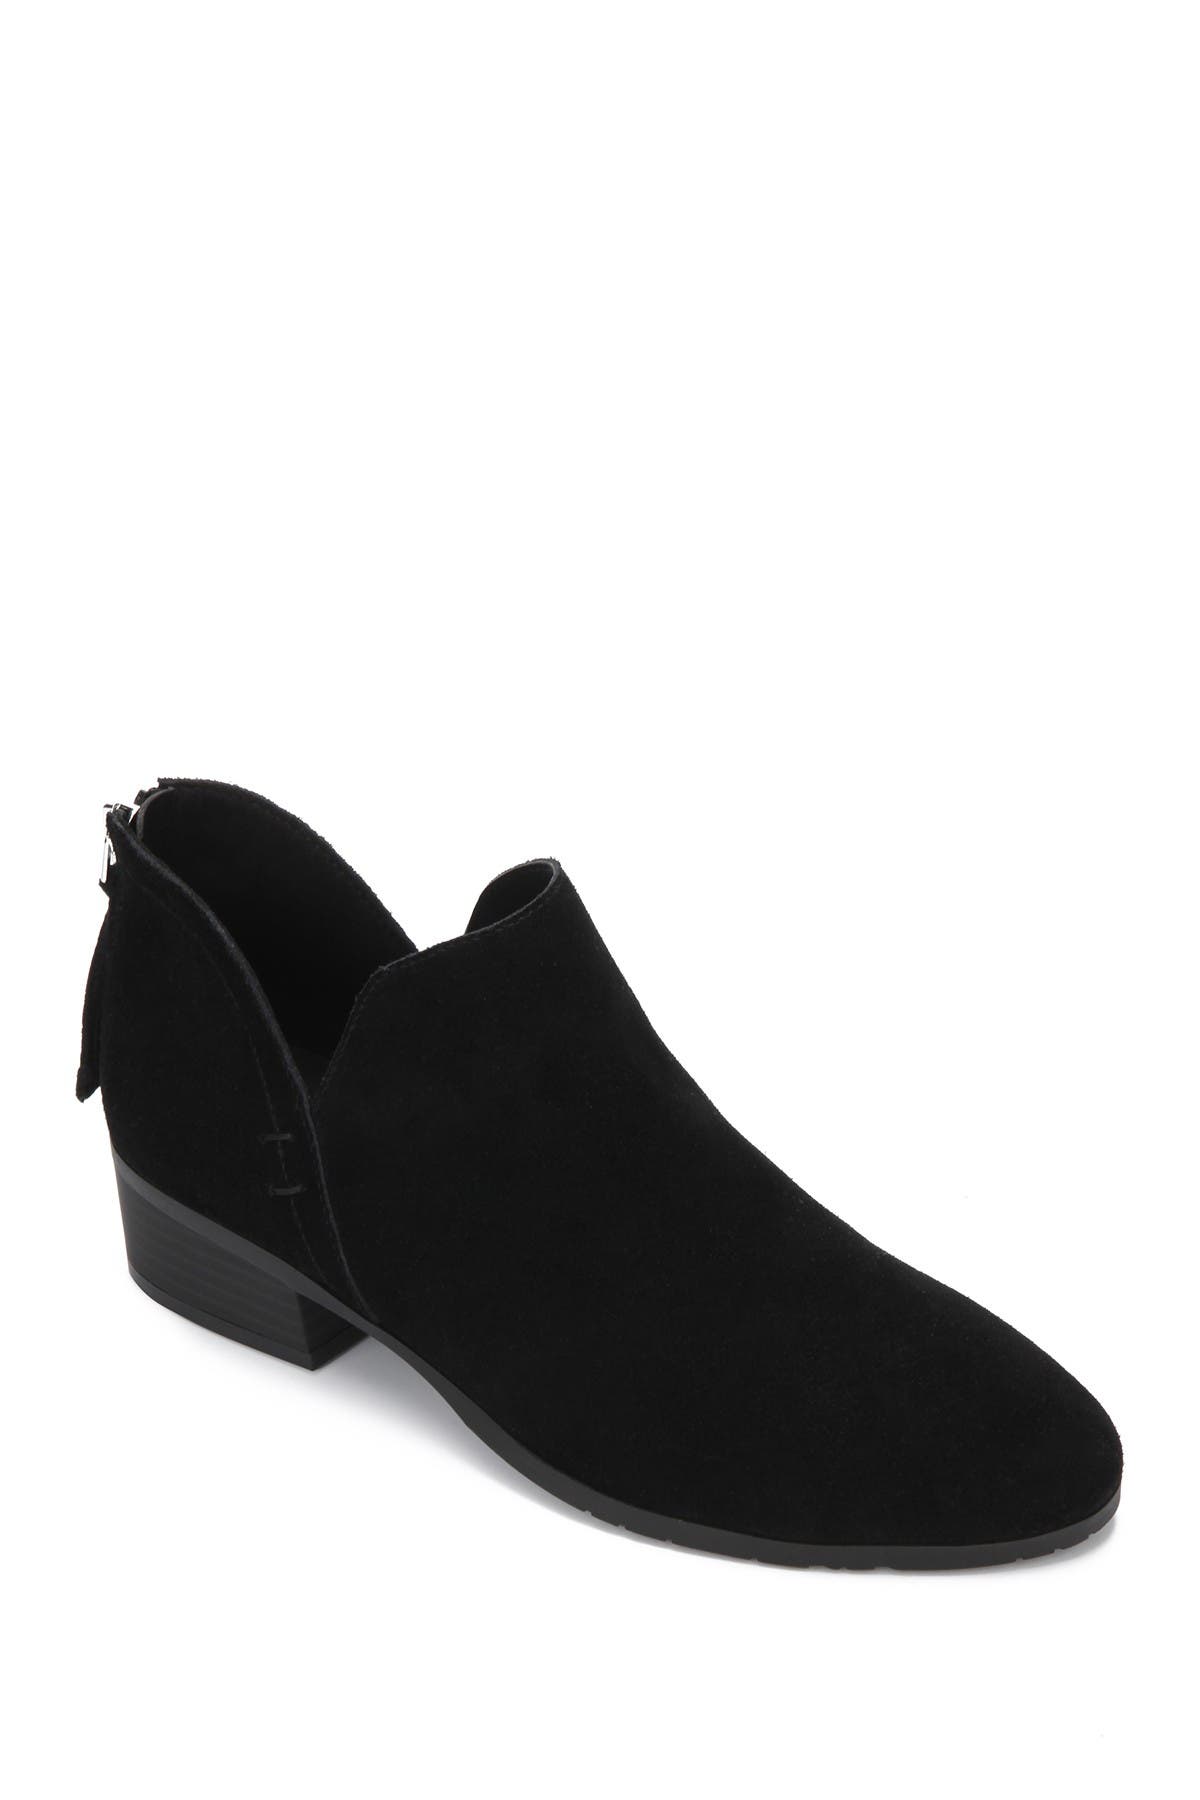 KENNETH COLE | Side Skip Suede Ankle 